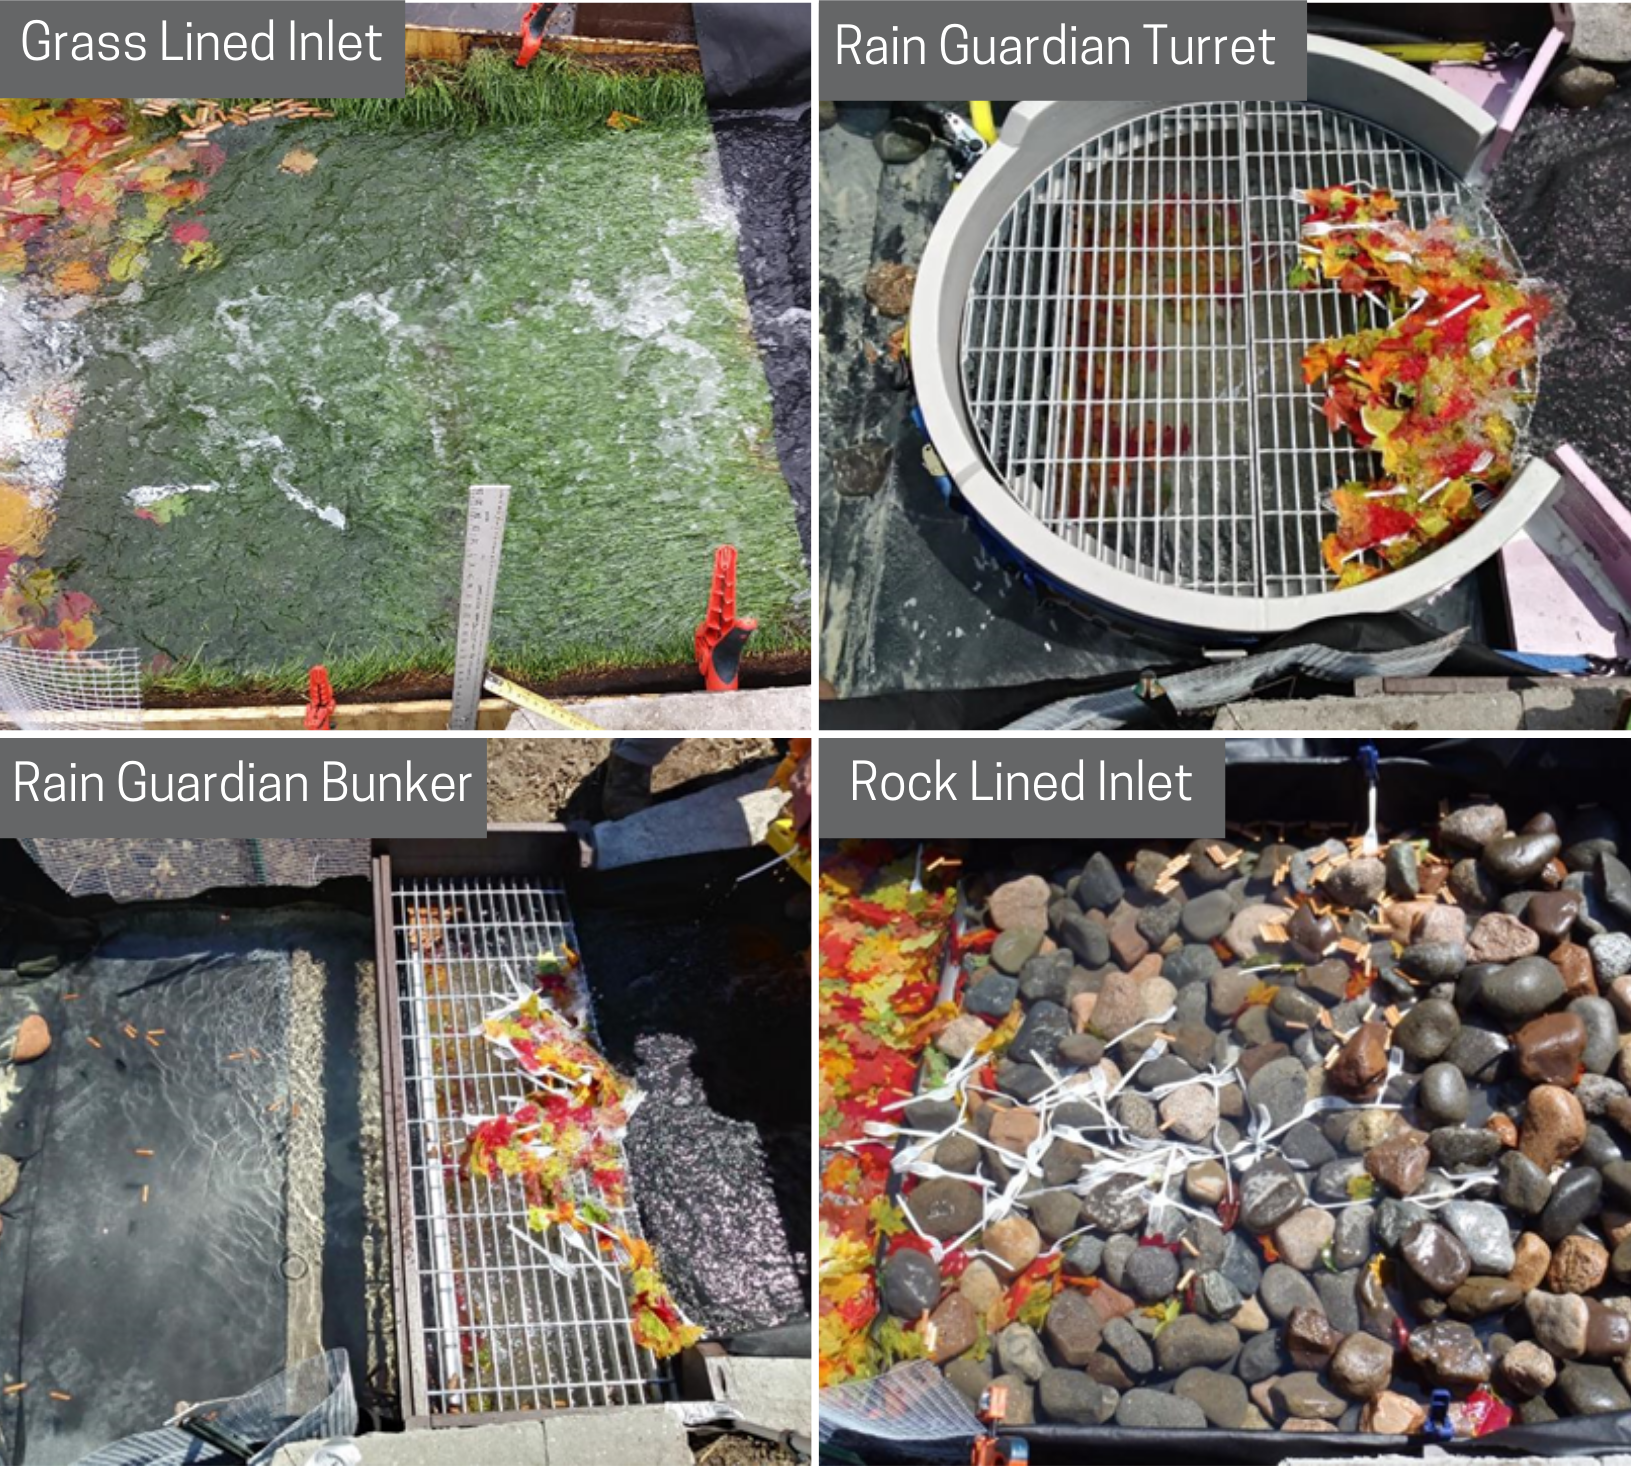 Four photos, each of a different pretreatment method:  a grass lined inlet, the Rain Guardian Turret, the Rain Guardian Bunker, and a rock lined inlet. Photos shows the pretreatment methods with captures gross solids, like fake leaves and forks. 